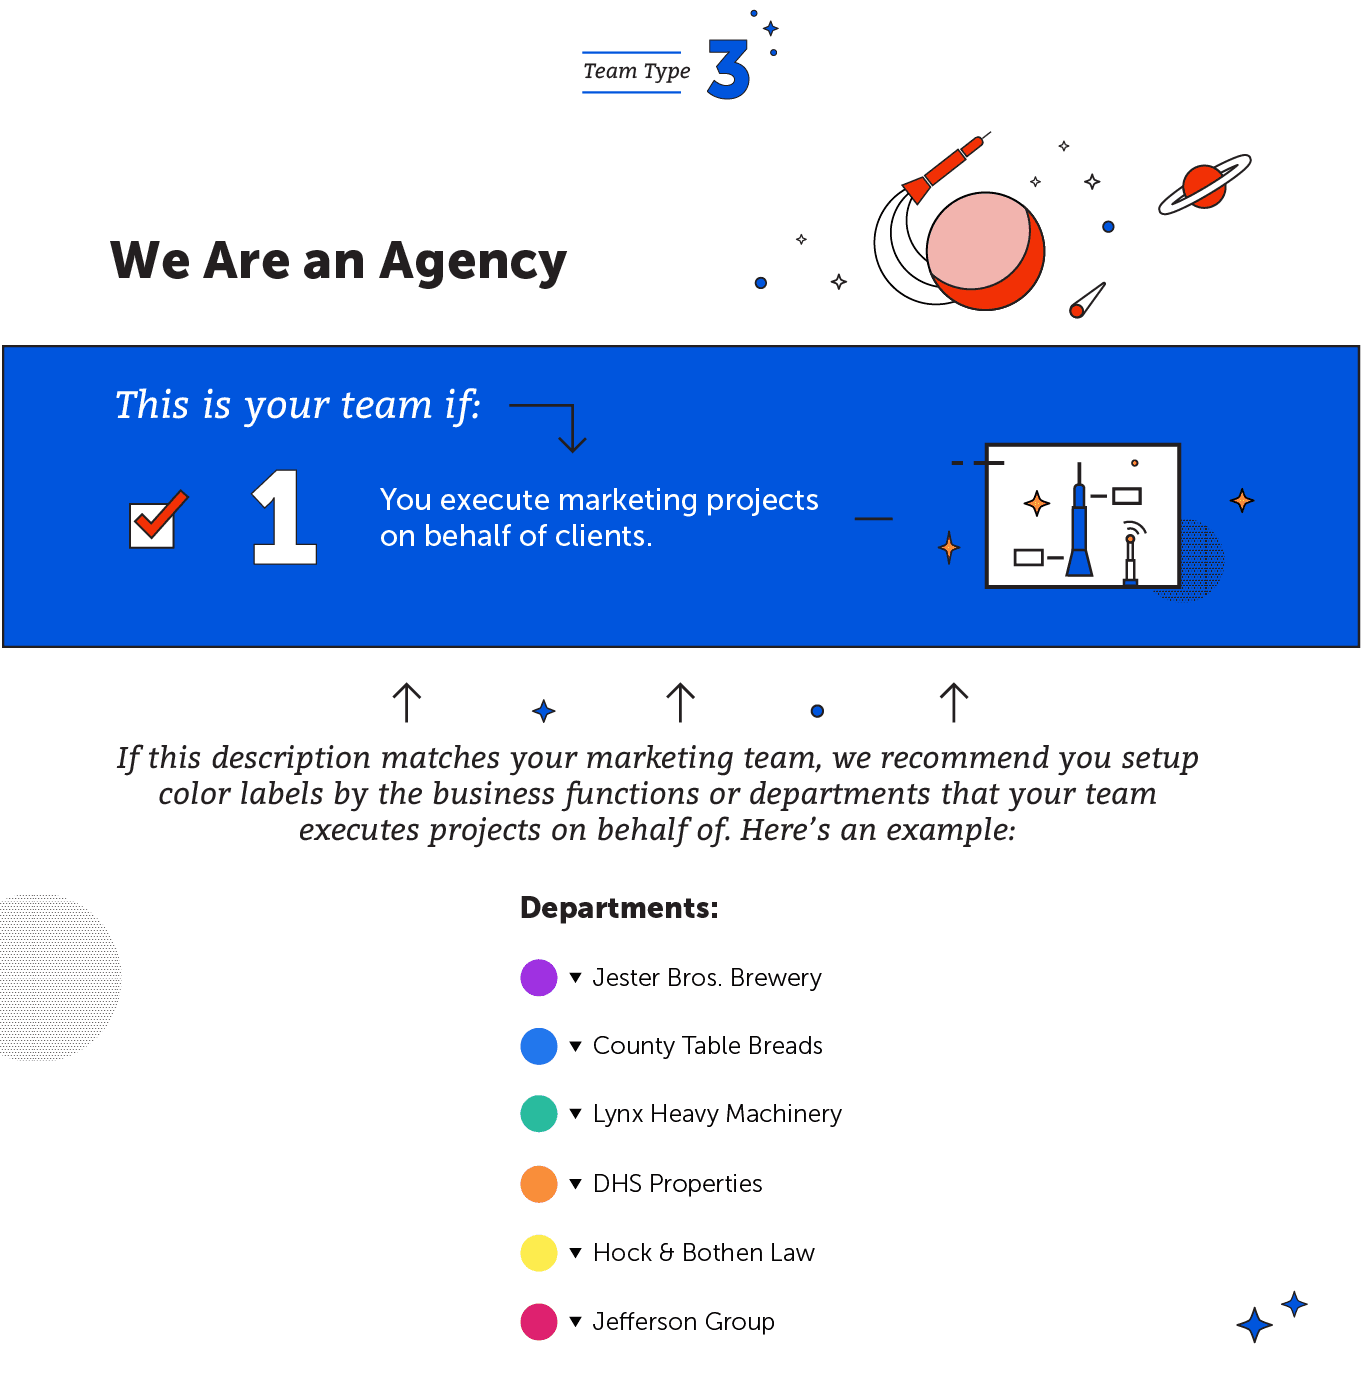 We are an agency